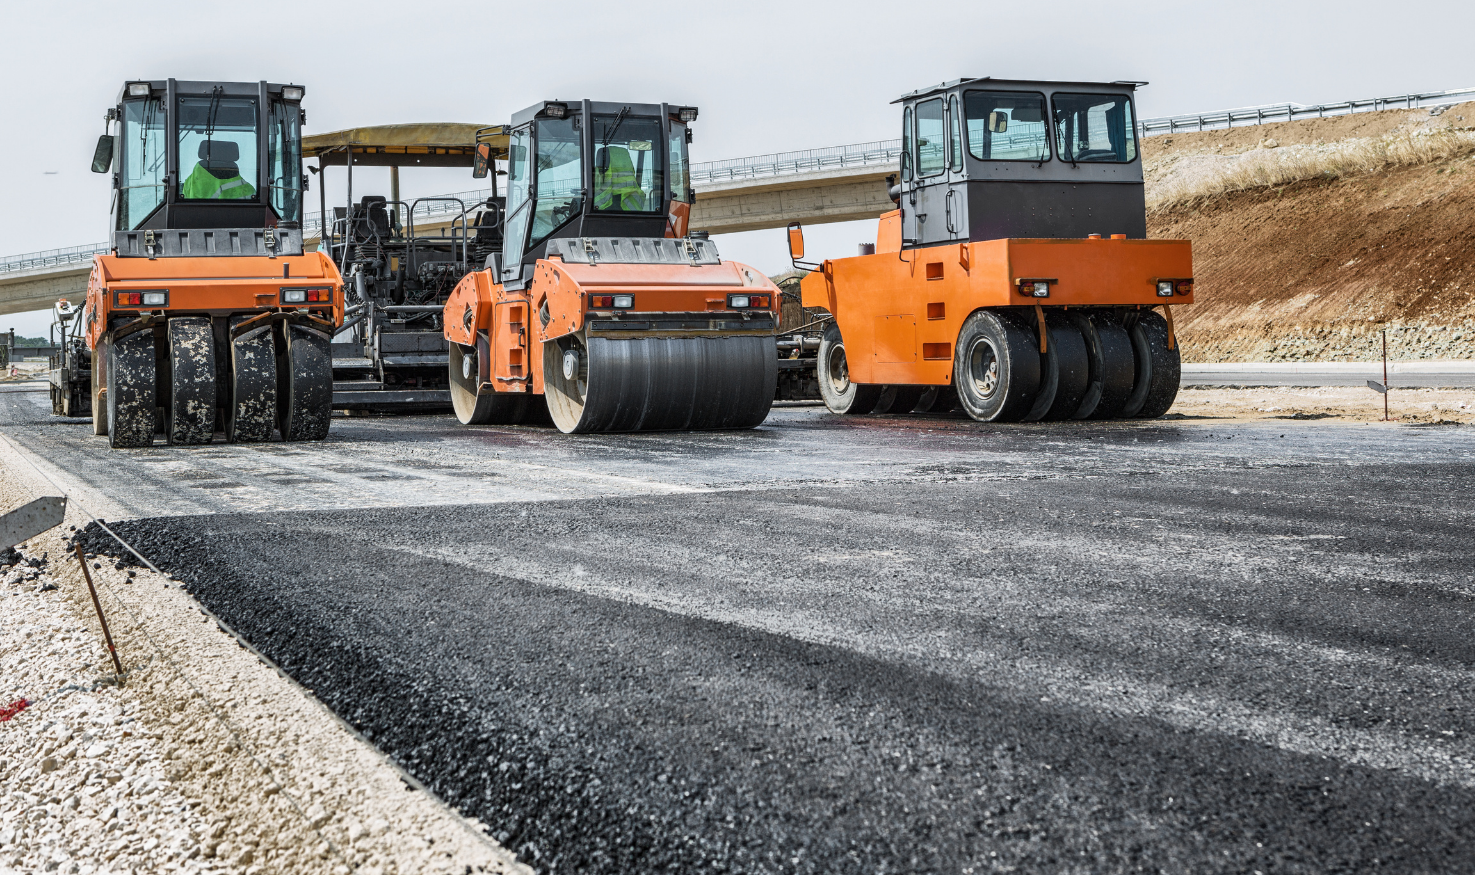 Highway construction processes involve user devices that need to be managed